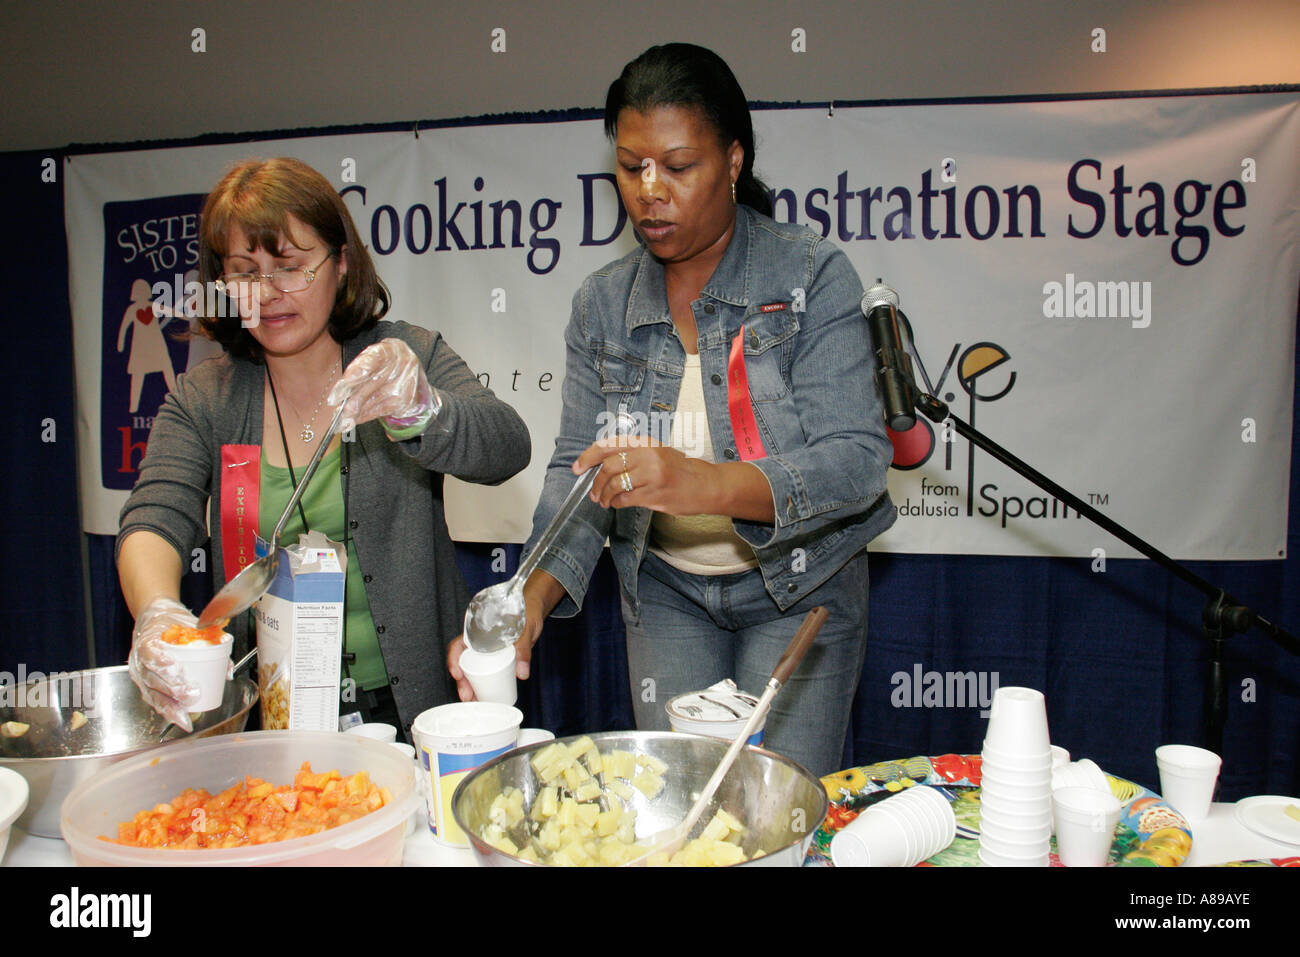 Miami Florida,National Woman's Heart Day Health Fair,cooking demonstration,Black Blacks African Africans ethnic minority,adult adults woman women fema Stock Photo